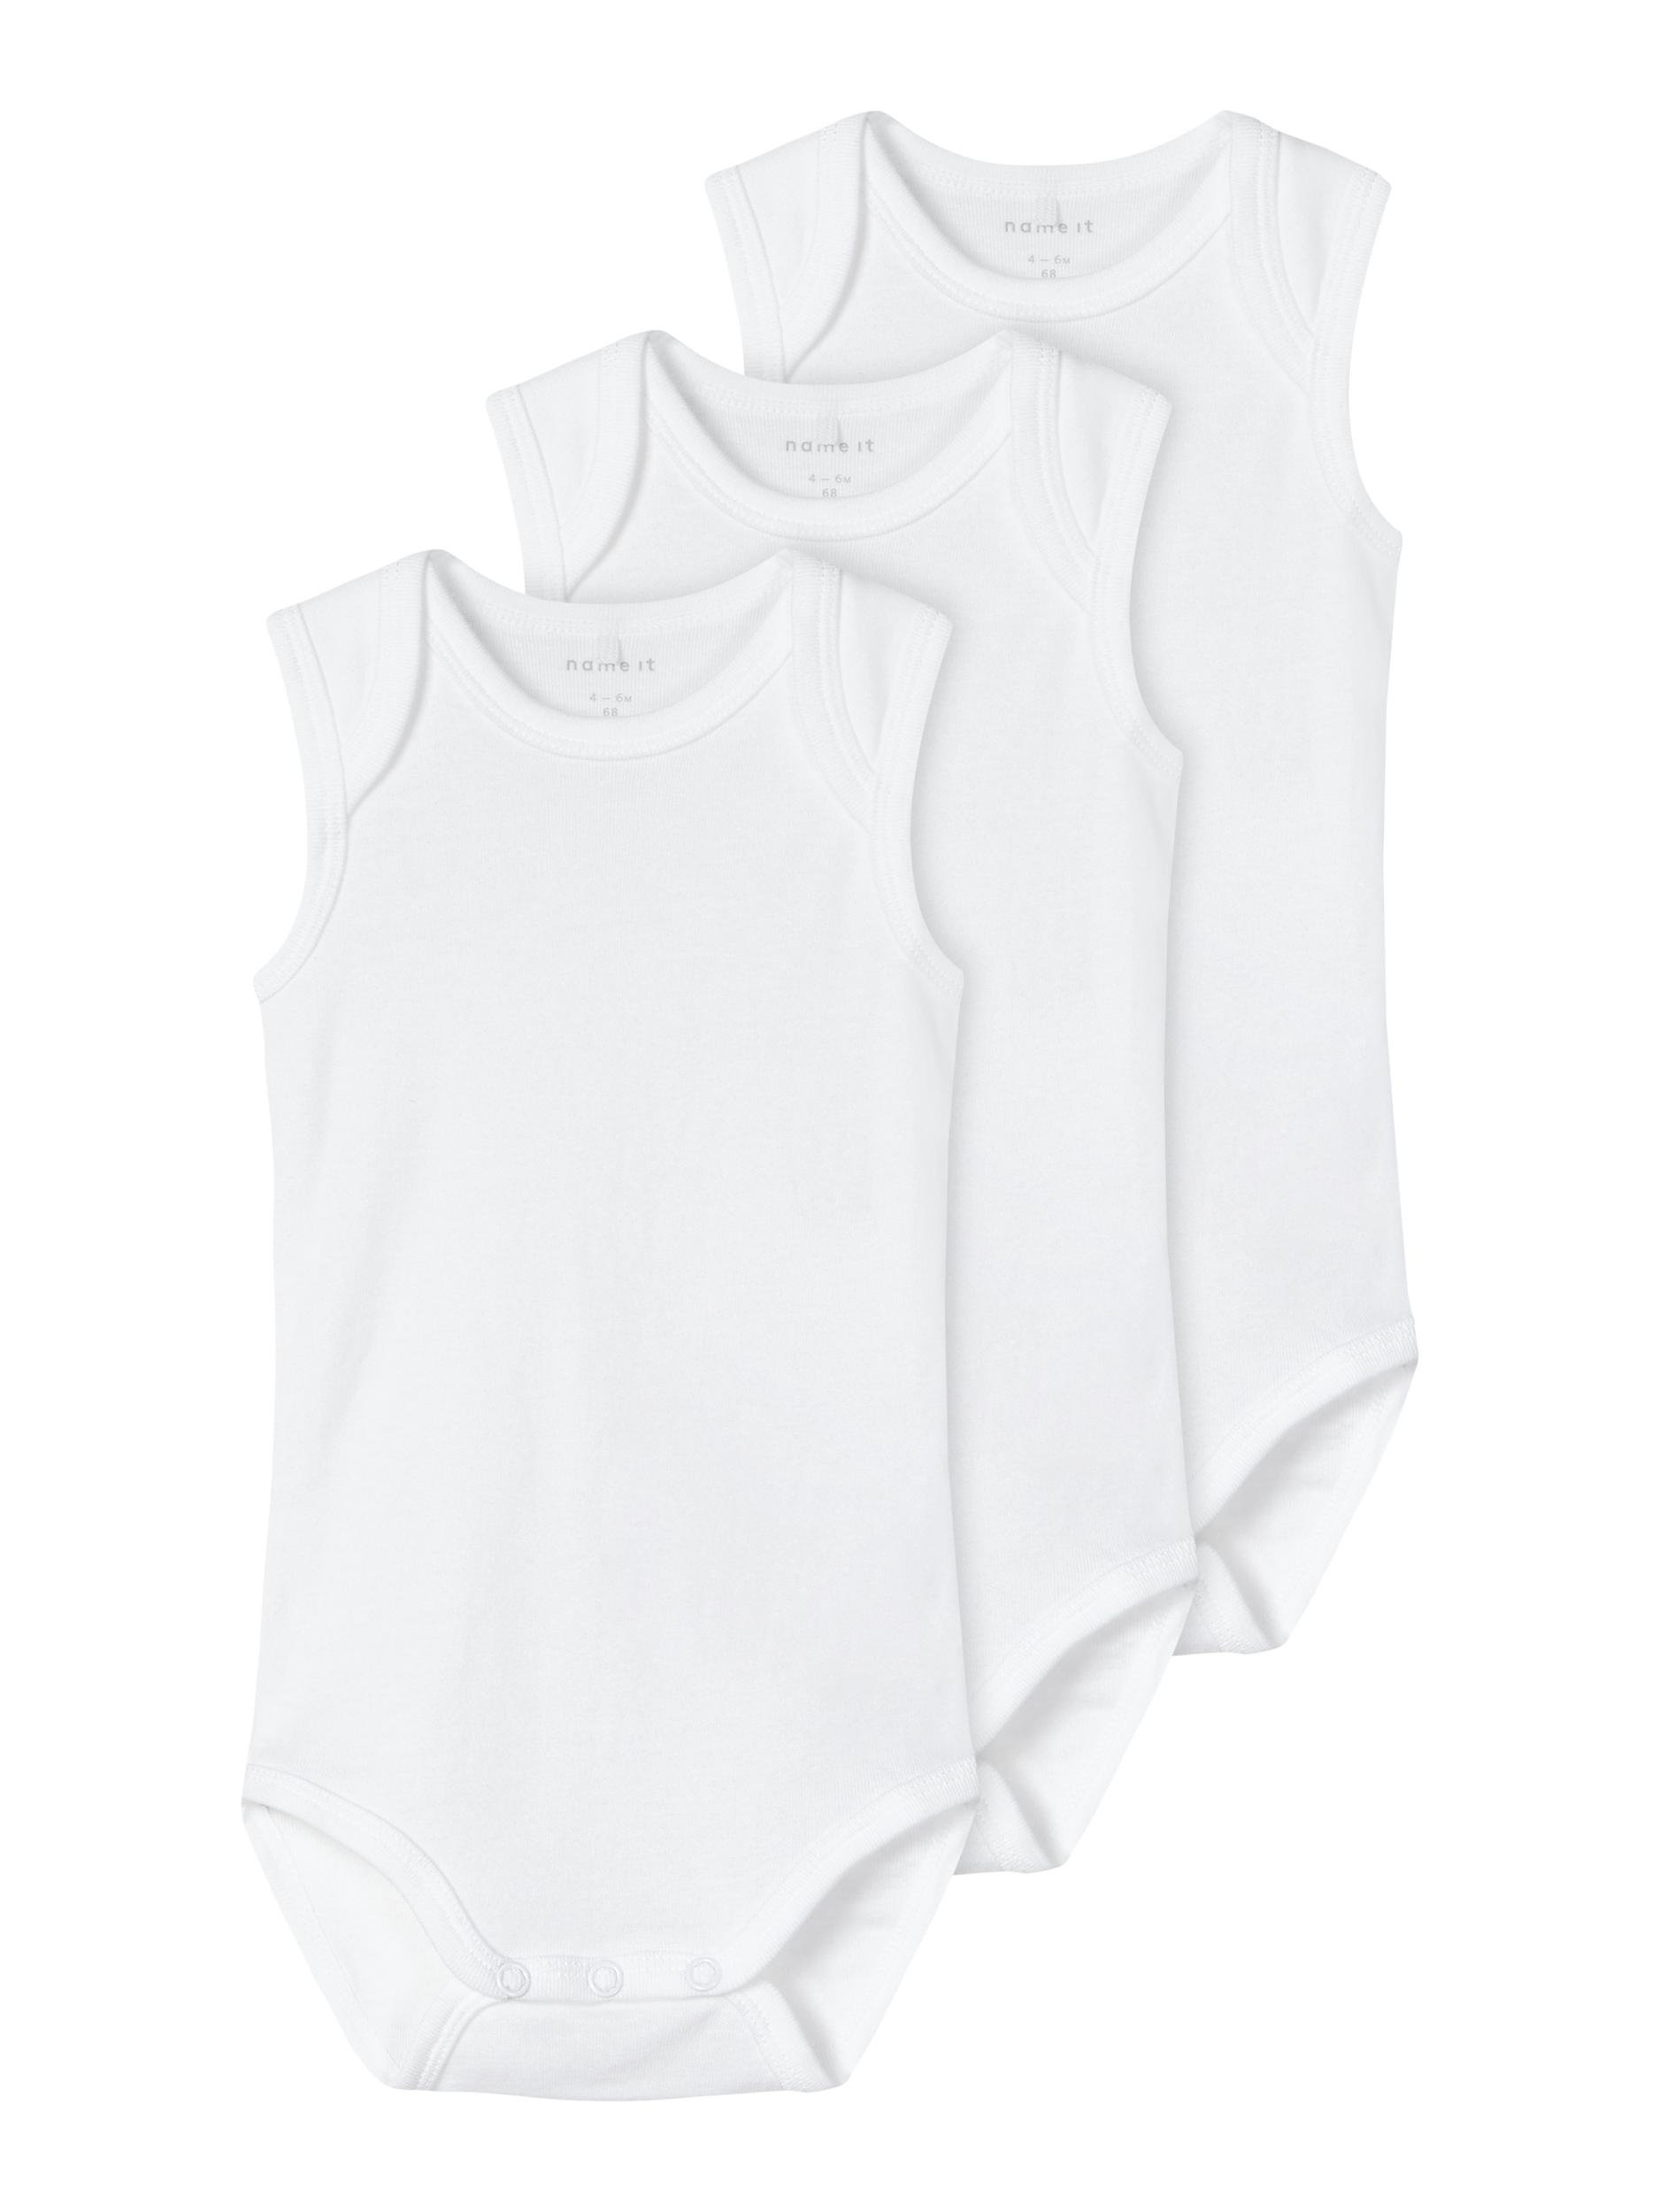 online 3P NOOS TANK IT Weiss WHITE 3 NBNBODY kaufen NAME SOLID